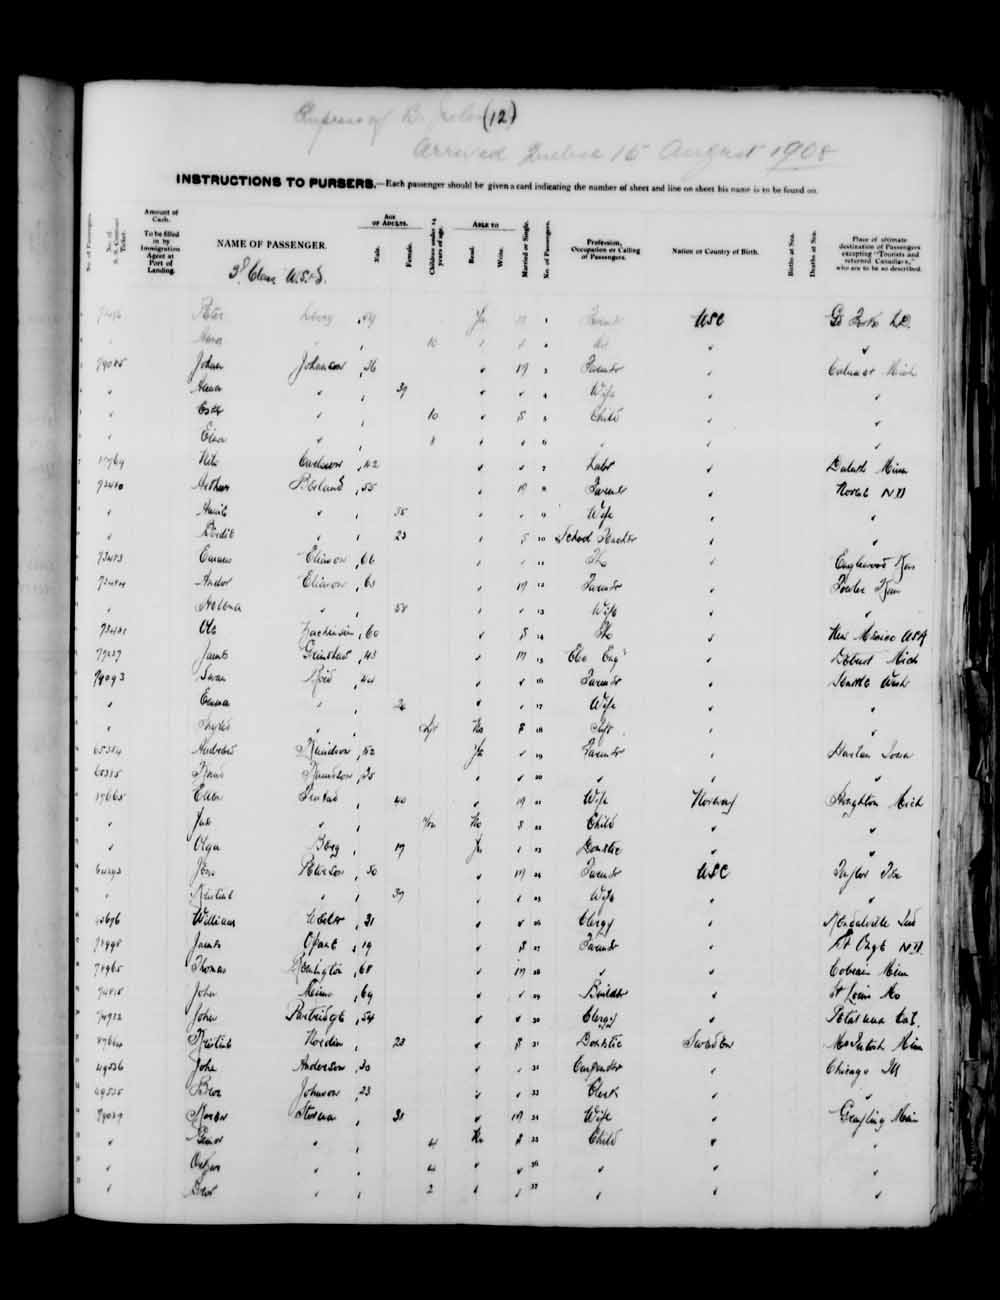 Digitized page of Quebec Passenger Lists for Image No.: e003591583